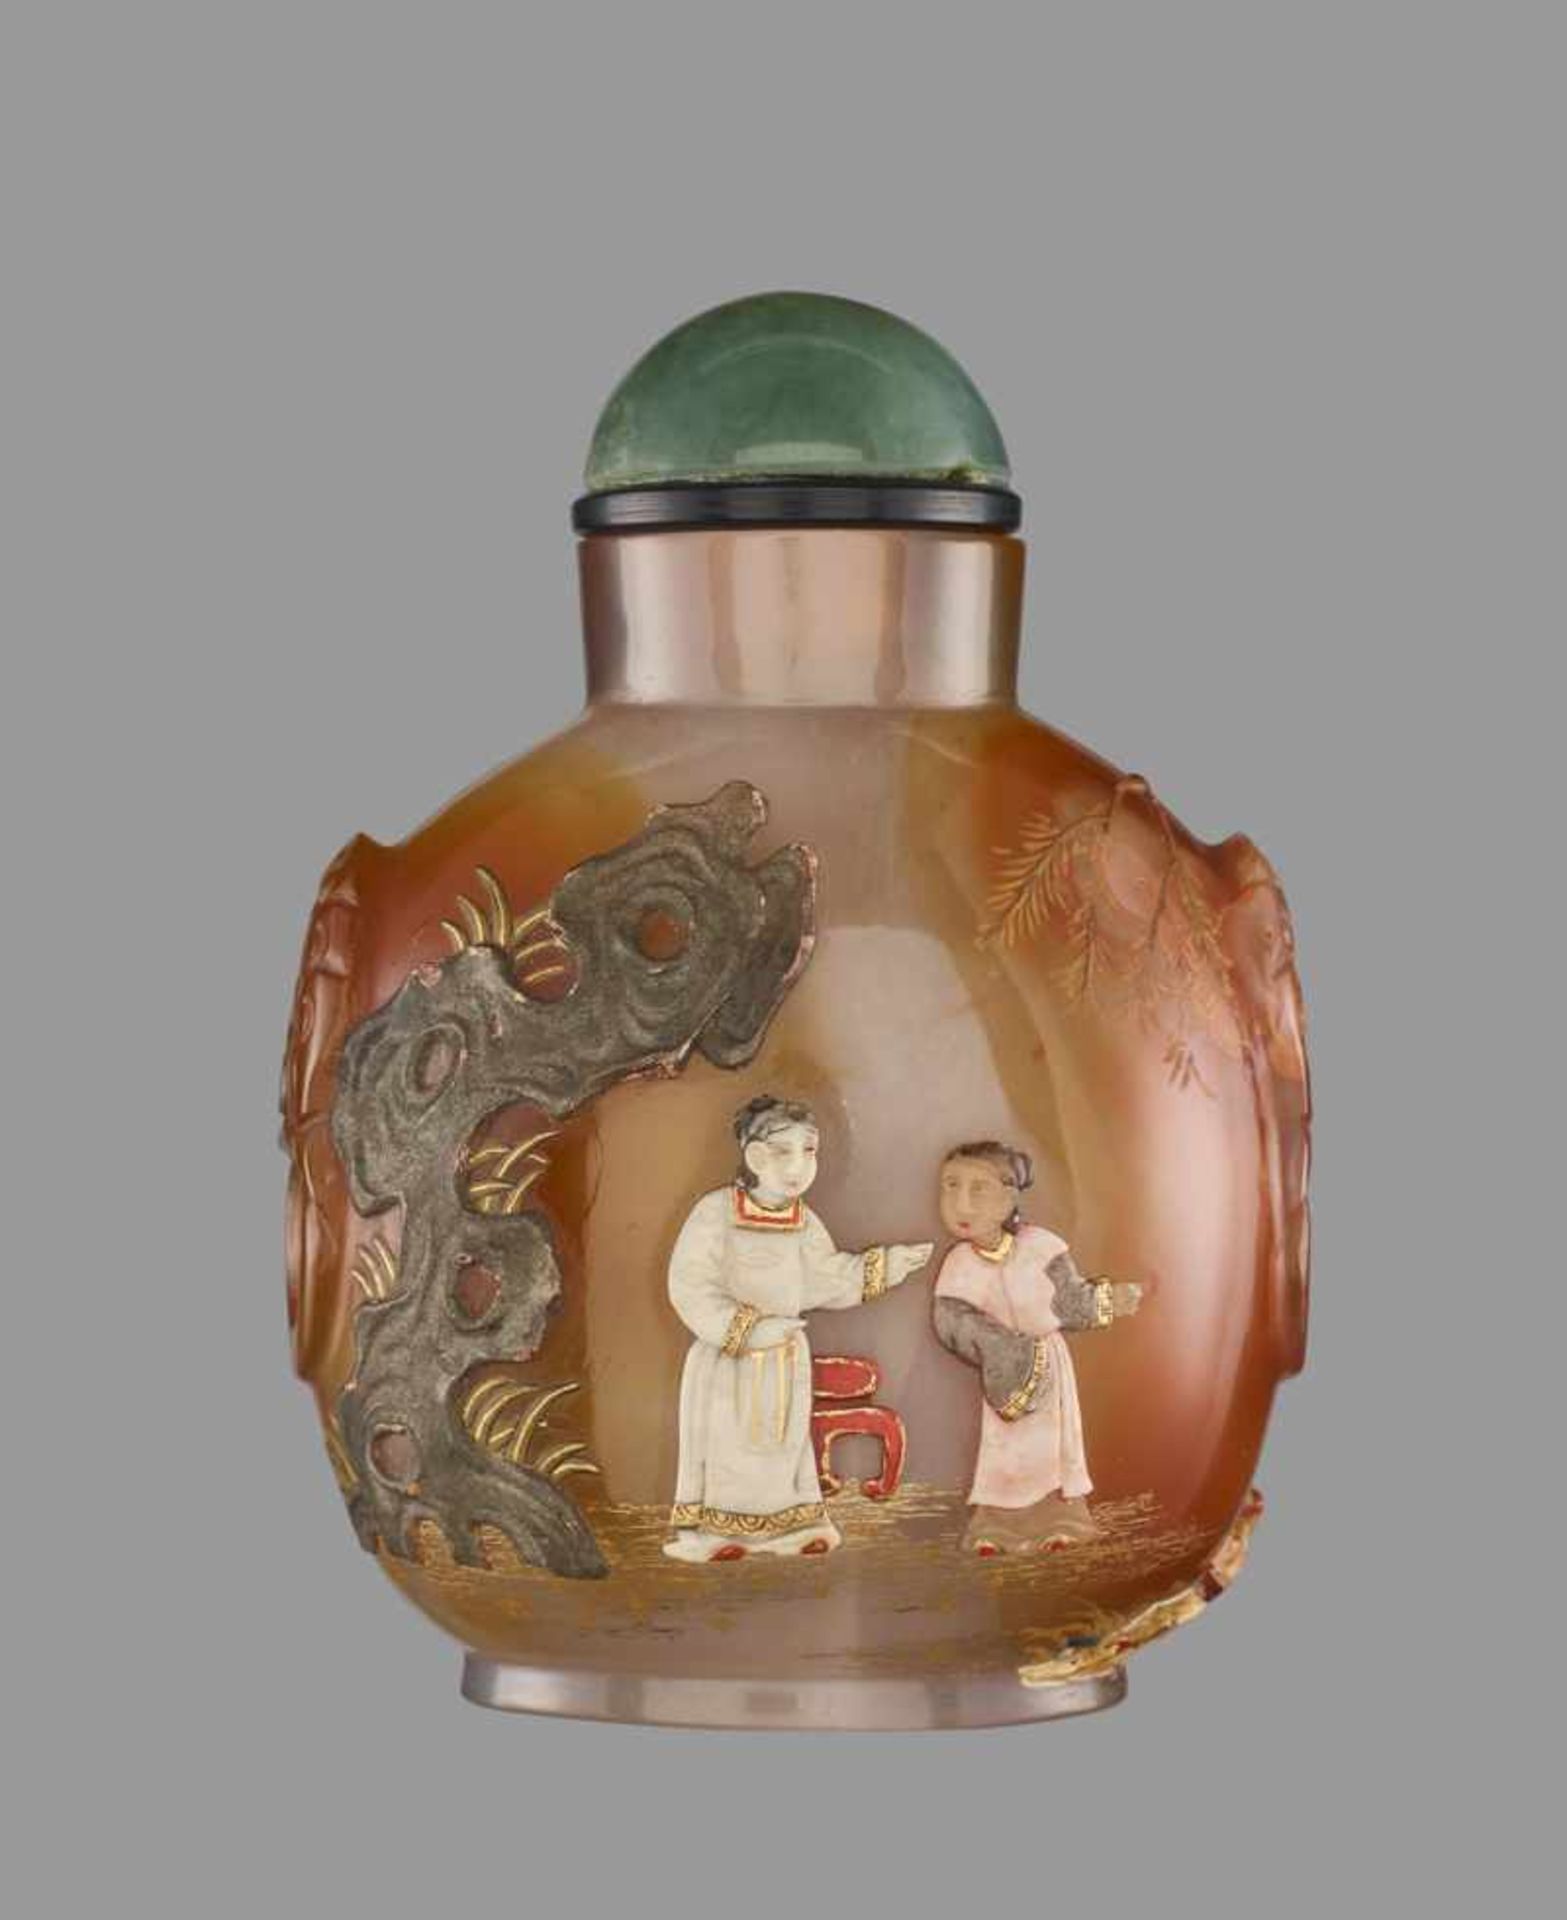 A LACQUER, IVORY AND SOAPSTONE-EMBELLISHED CHALCEDONY 'FIGURES' SNUFF BOTTLE Chalcedony of light